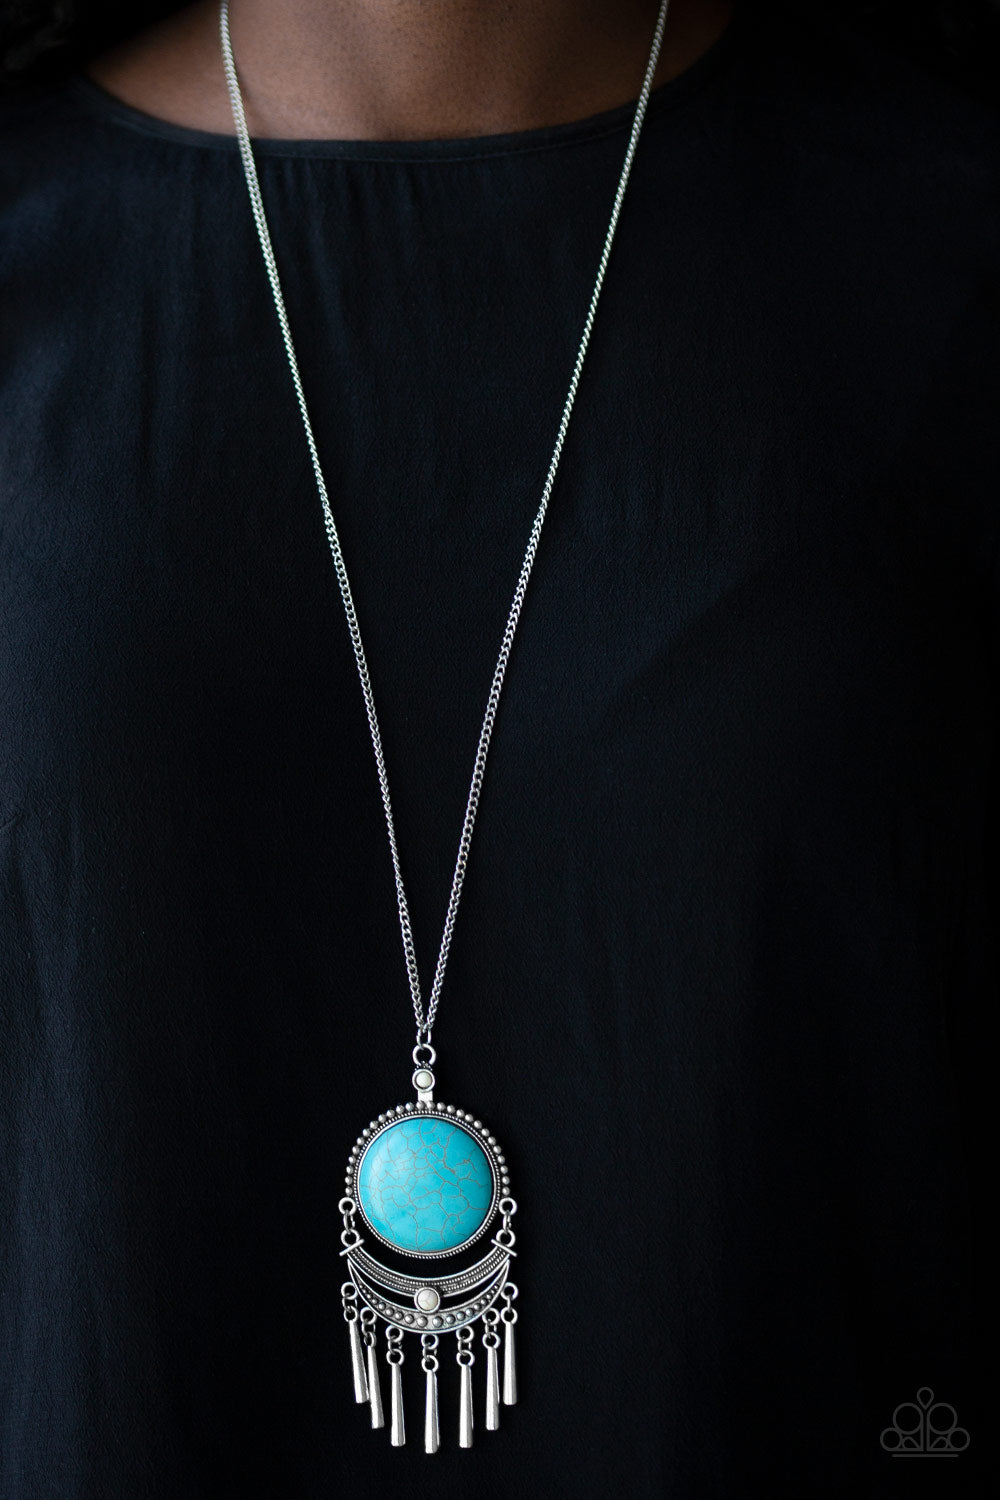 &lt;p&gt;Swinging from the bottom of a lengthened silver chain, a dramatic turquoise stone gives way to an ornate crescent shaped frame dotted with a dainty white stone. Brushed in an antiqued shimmer, flared silver bars swing from the bottom of the dramatic pendant, adding a playful movement to the seasonal palette. Features an adjustable clasp closure.&lt;/p&gt;

&lt;p&gt;&lt;i&gt; Sold as one individual necklace.  Includes one pair of matching earrings.
&lt;/i&gt;&lt;/p&gt;

